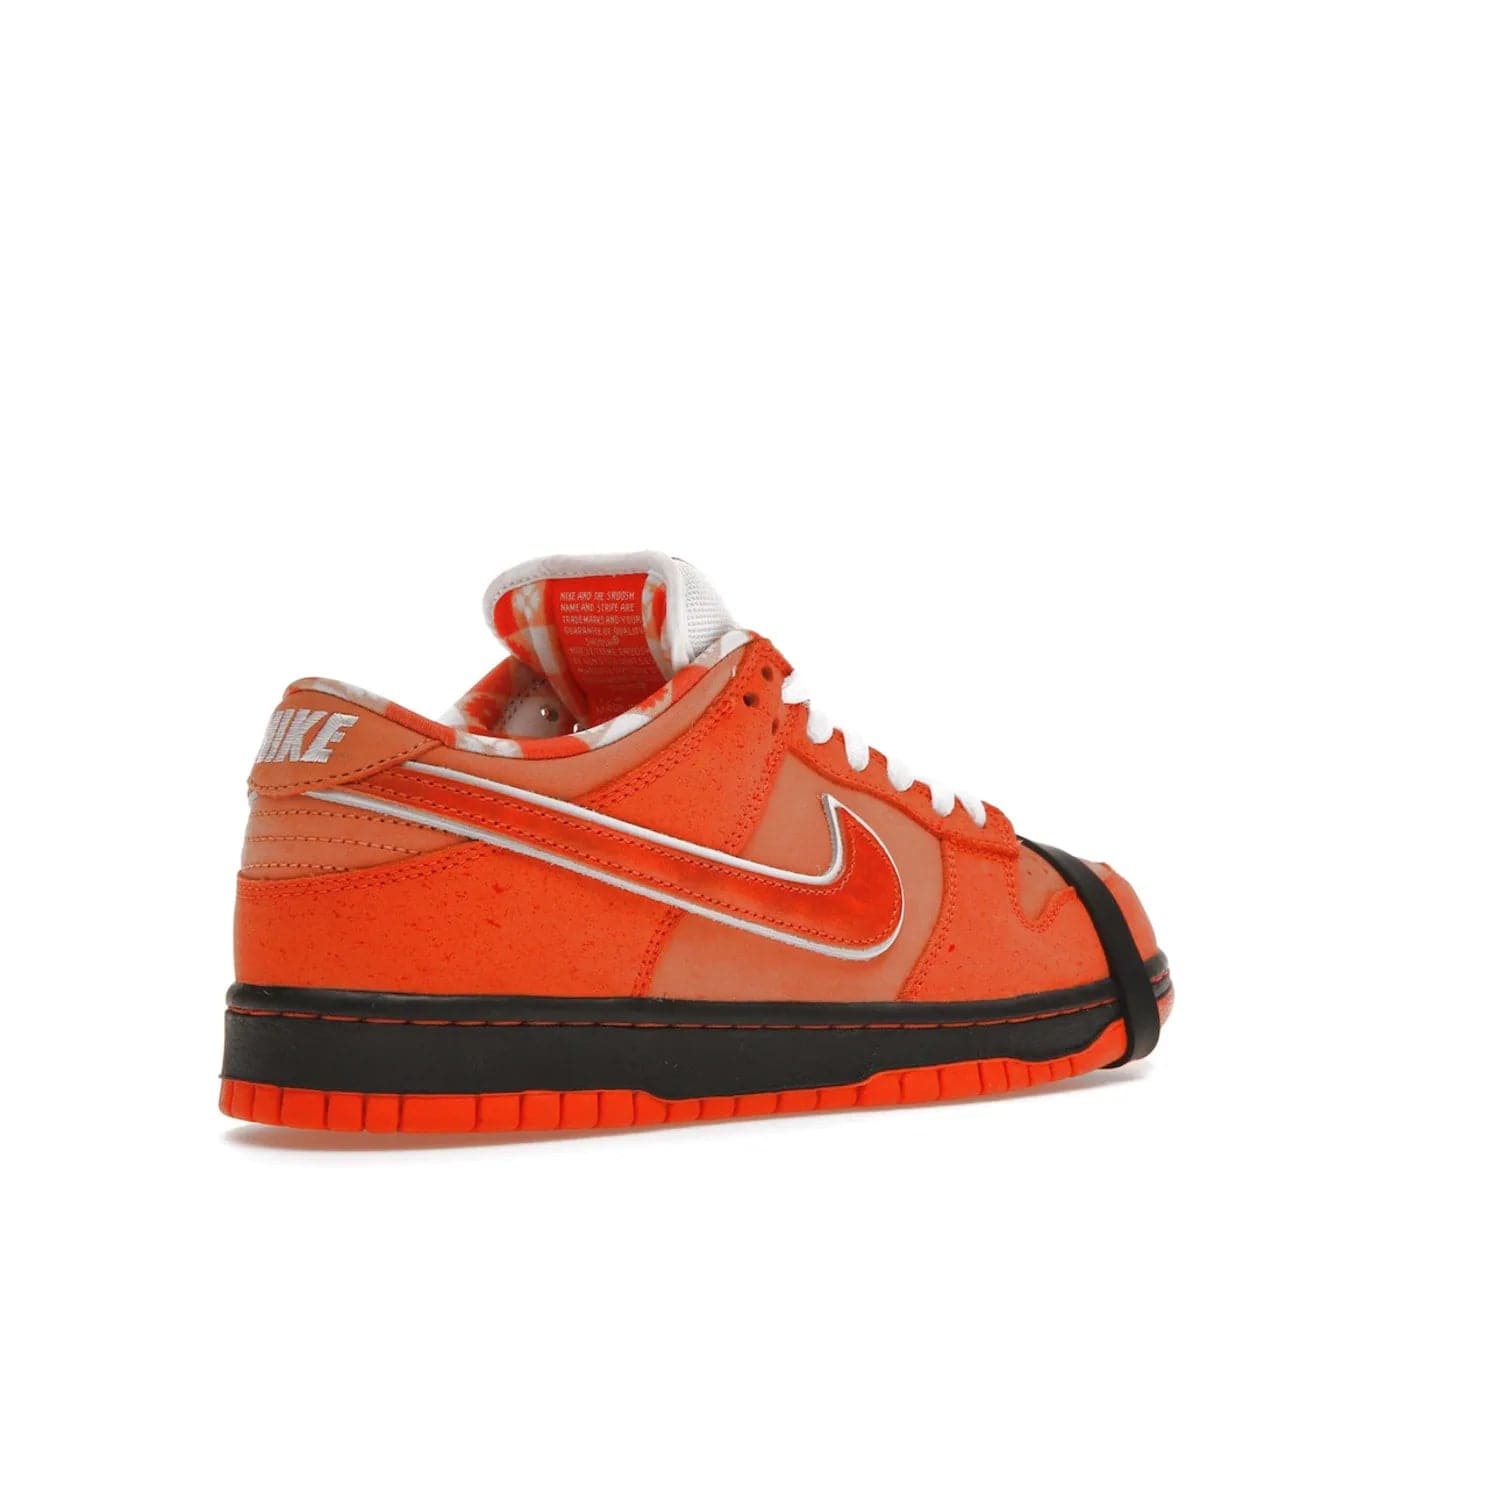 Nike SB Dunk Low Concepts Orange Lobster - Image 33 - Only at www.BallersClubKickz.com - Limited Nike SB Dunk Low Concepts Orange Lobster features premium nubuck upper with vibrant oranges for eye-catching colorblocked design. Signature Nike SB tag and bib-inspired interior for added texture. Outsole and cupsole provide extra reinforcement. Get it 12/20/2022.